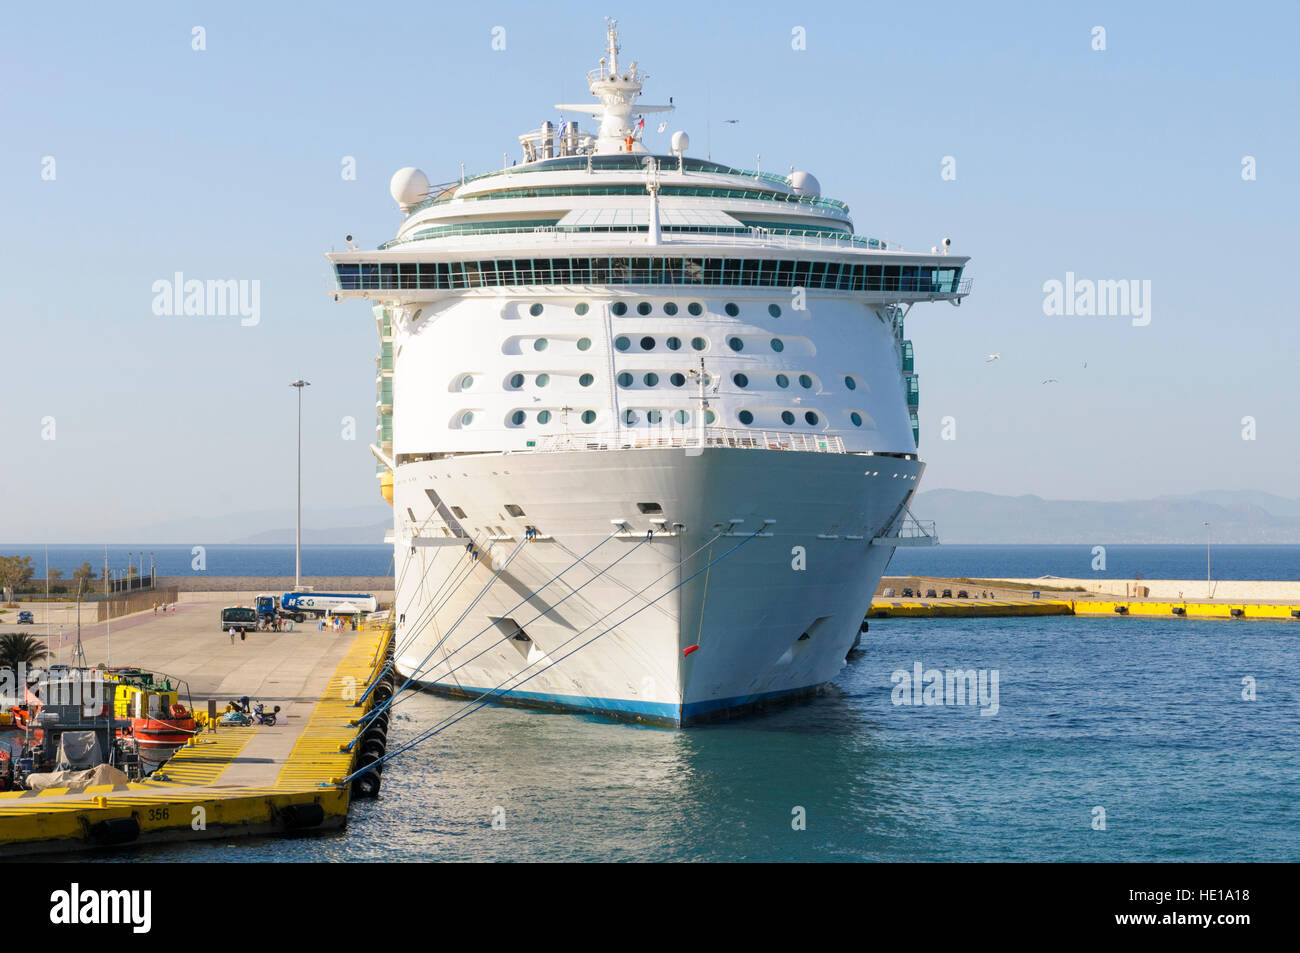 MS cruise ship Navigator of the Seas, moored in the port of Piraeus, Athens, Greece Stock Photo